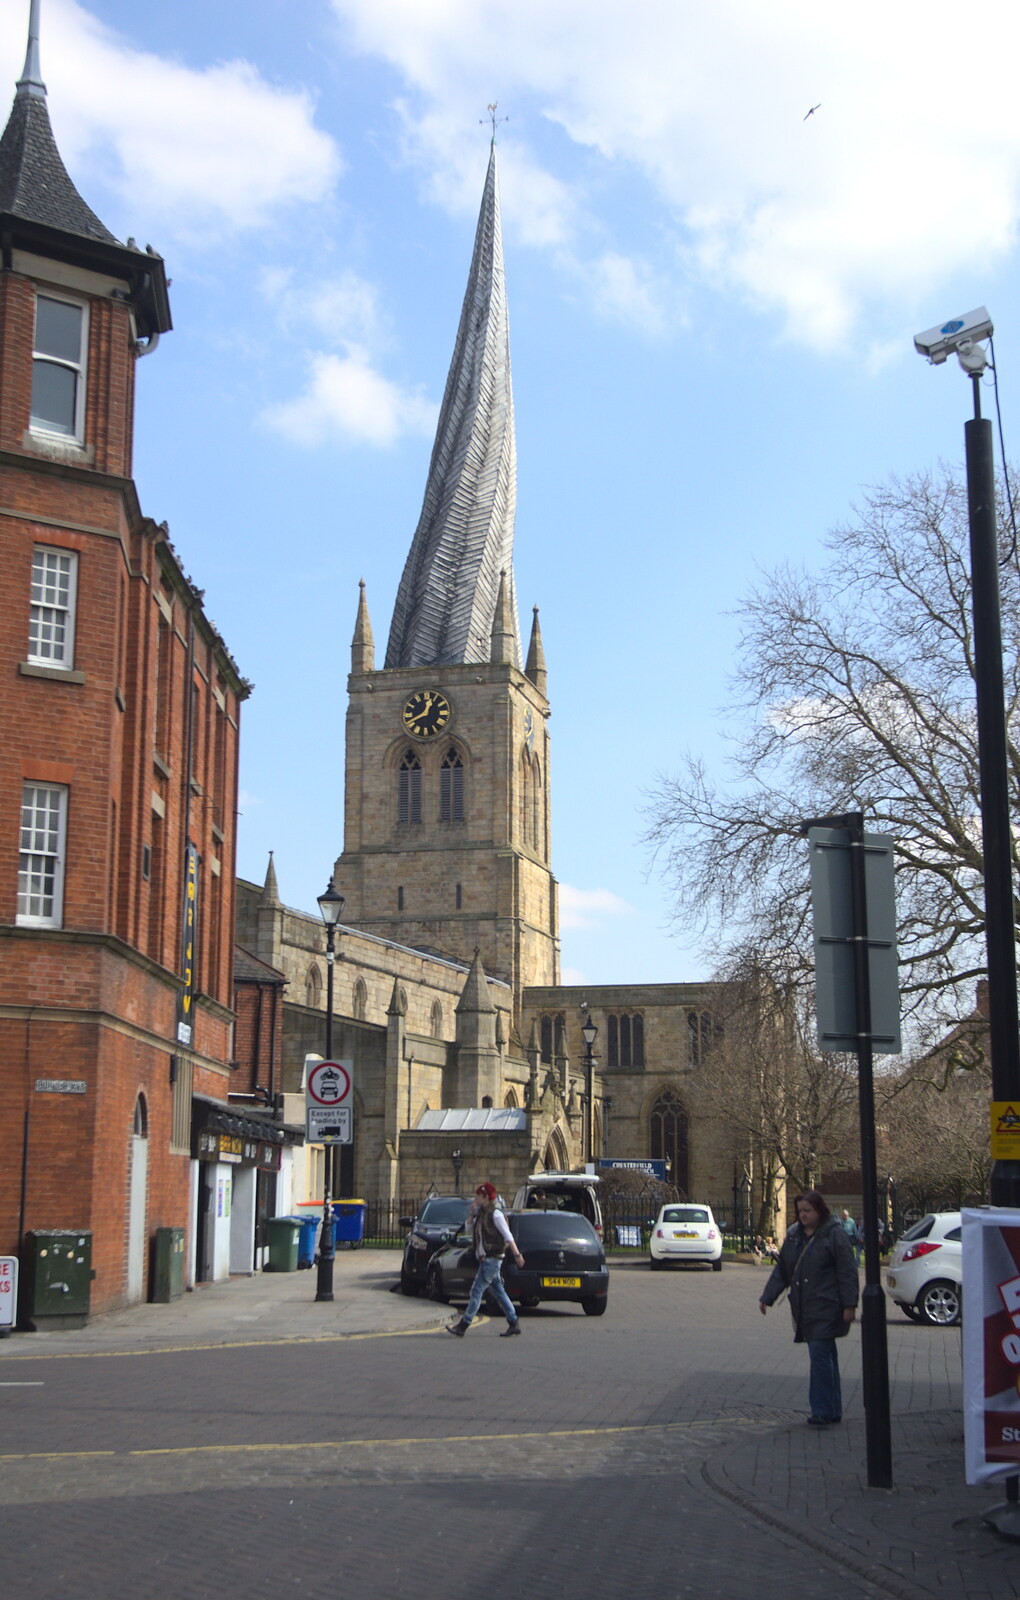 A view of the spire, with the 2.7 metre offset from Chesterfield and the Twisty Spire, Derbyshire - 19th April 2013